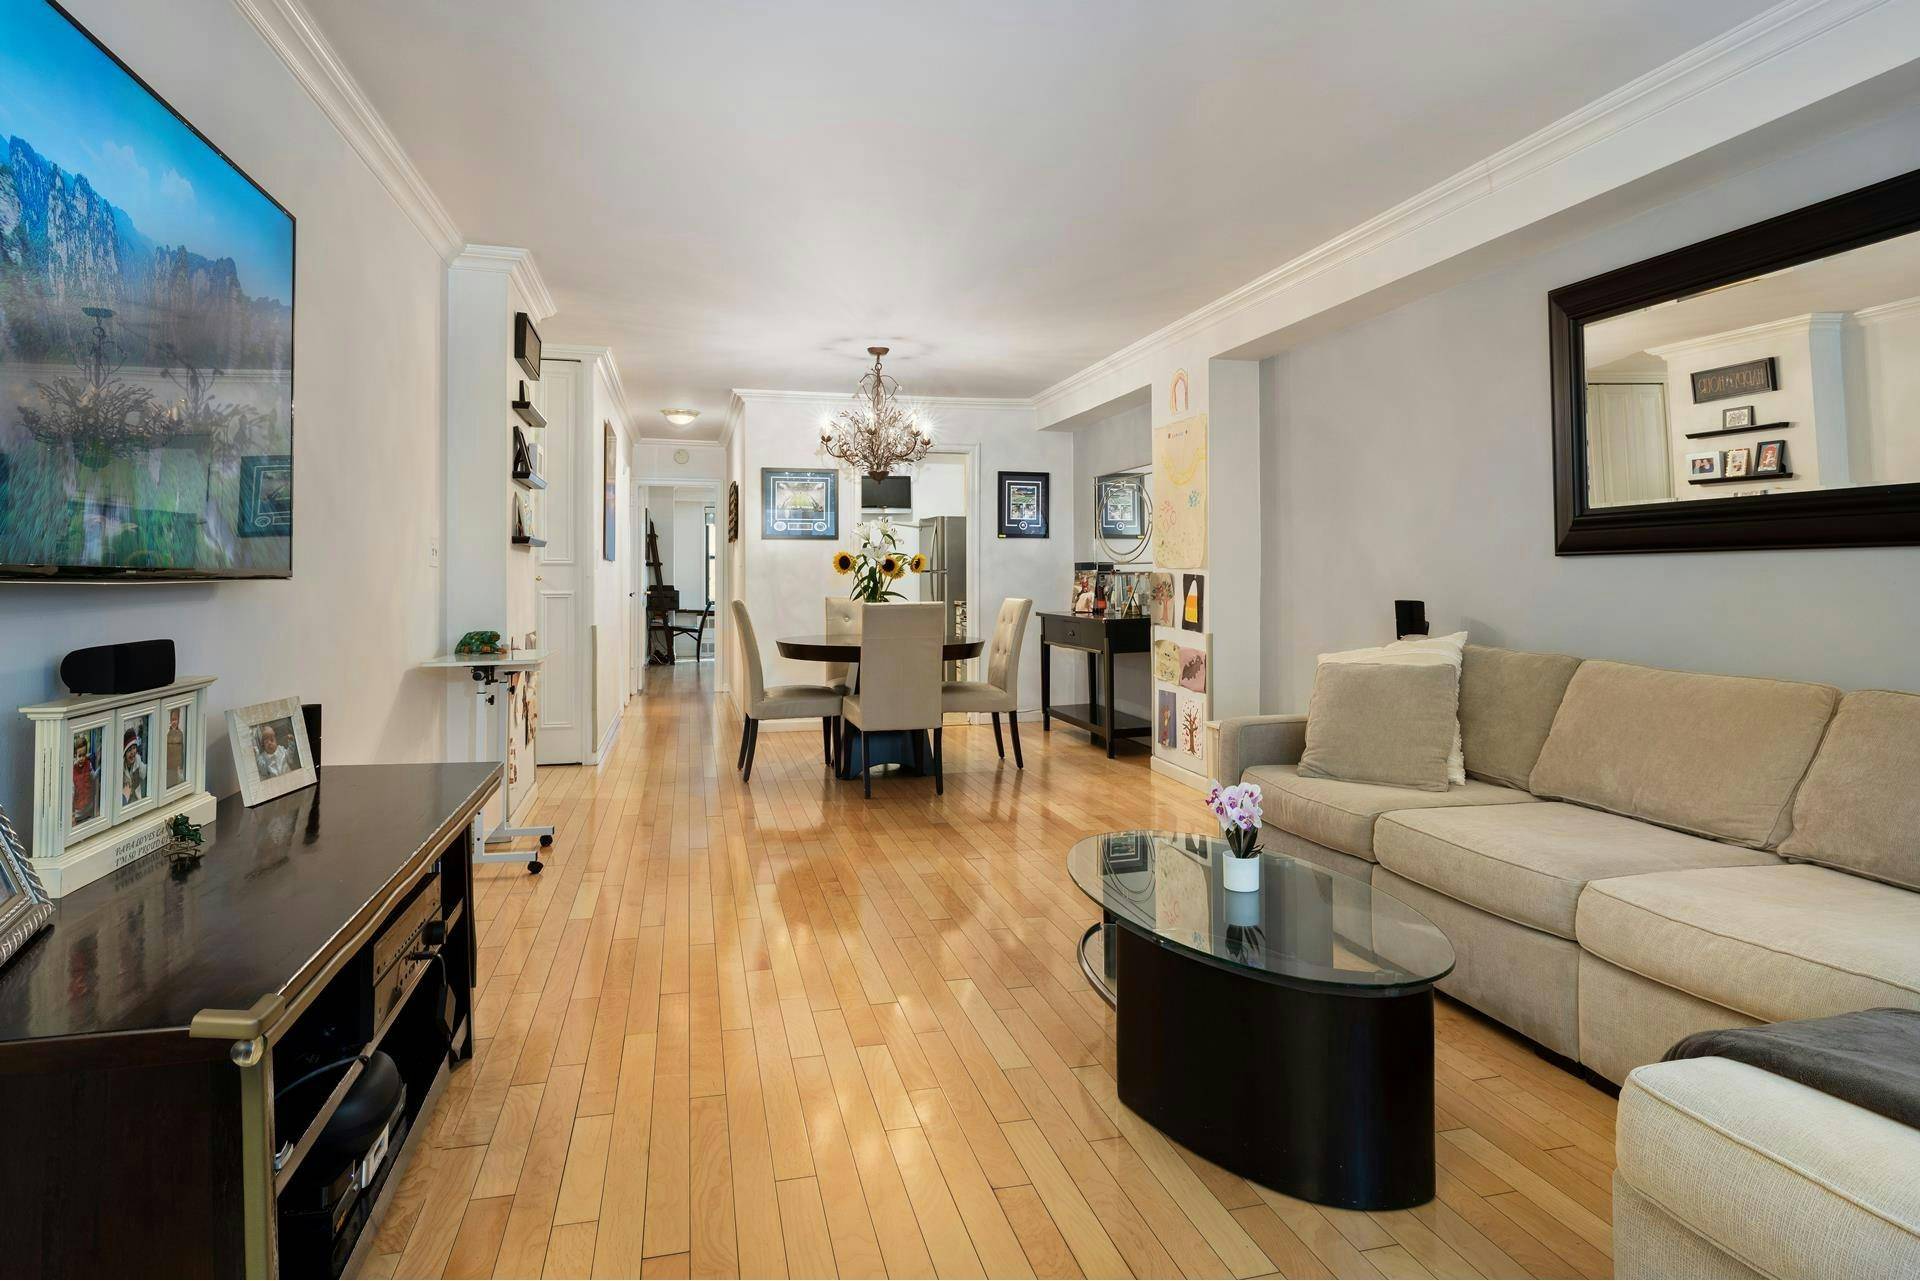 A Must See ! This Large, Beautifully Renovated Apartment boasts Southern and Northern Exposures.